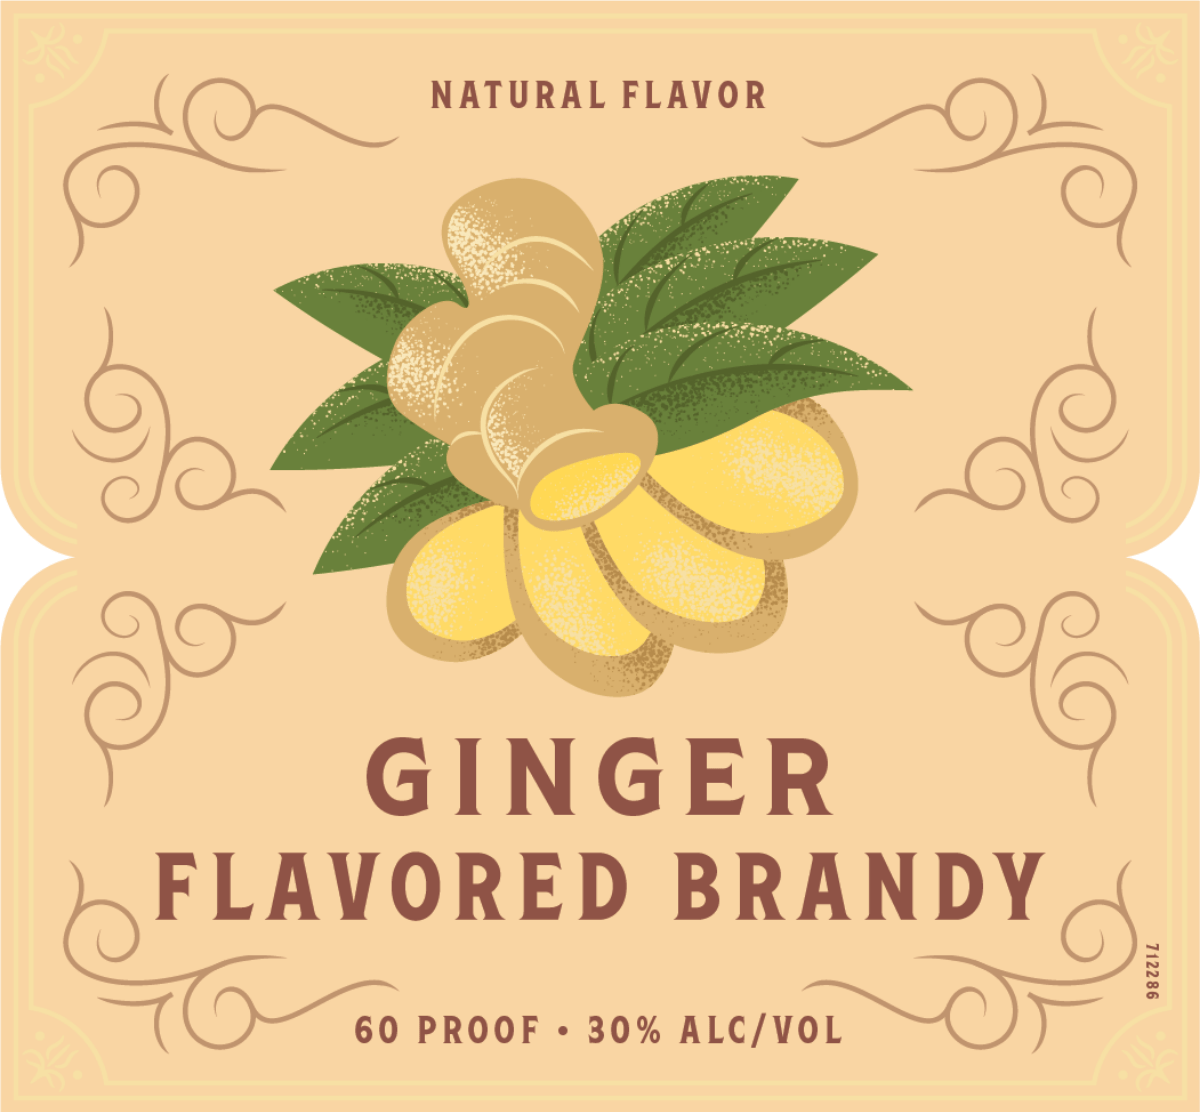 LEROUX® Ginger Flavored Brandy